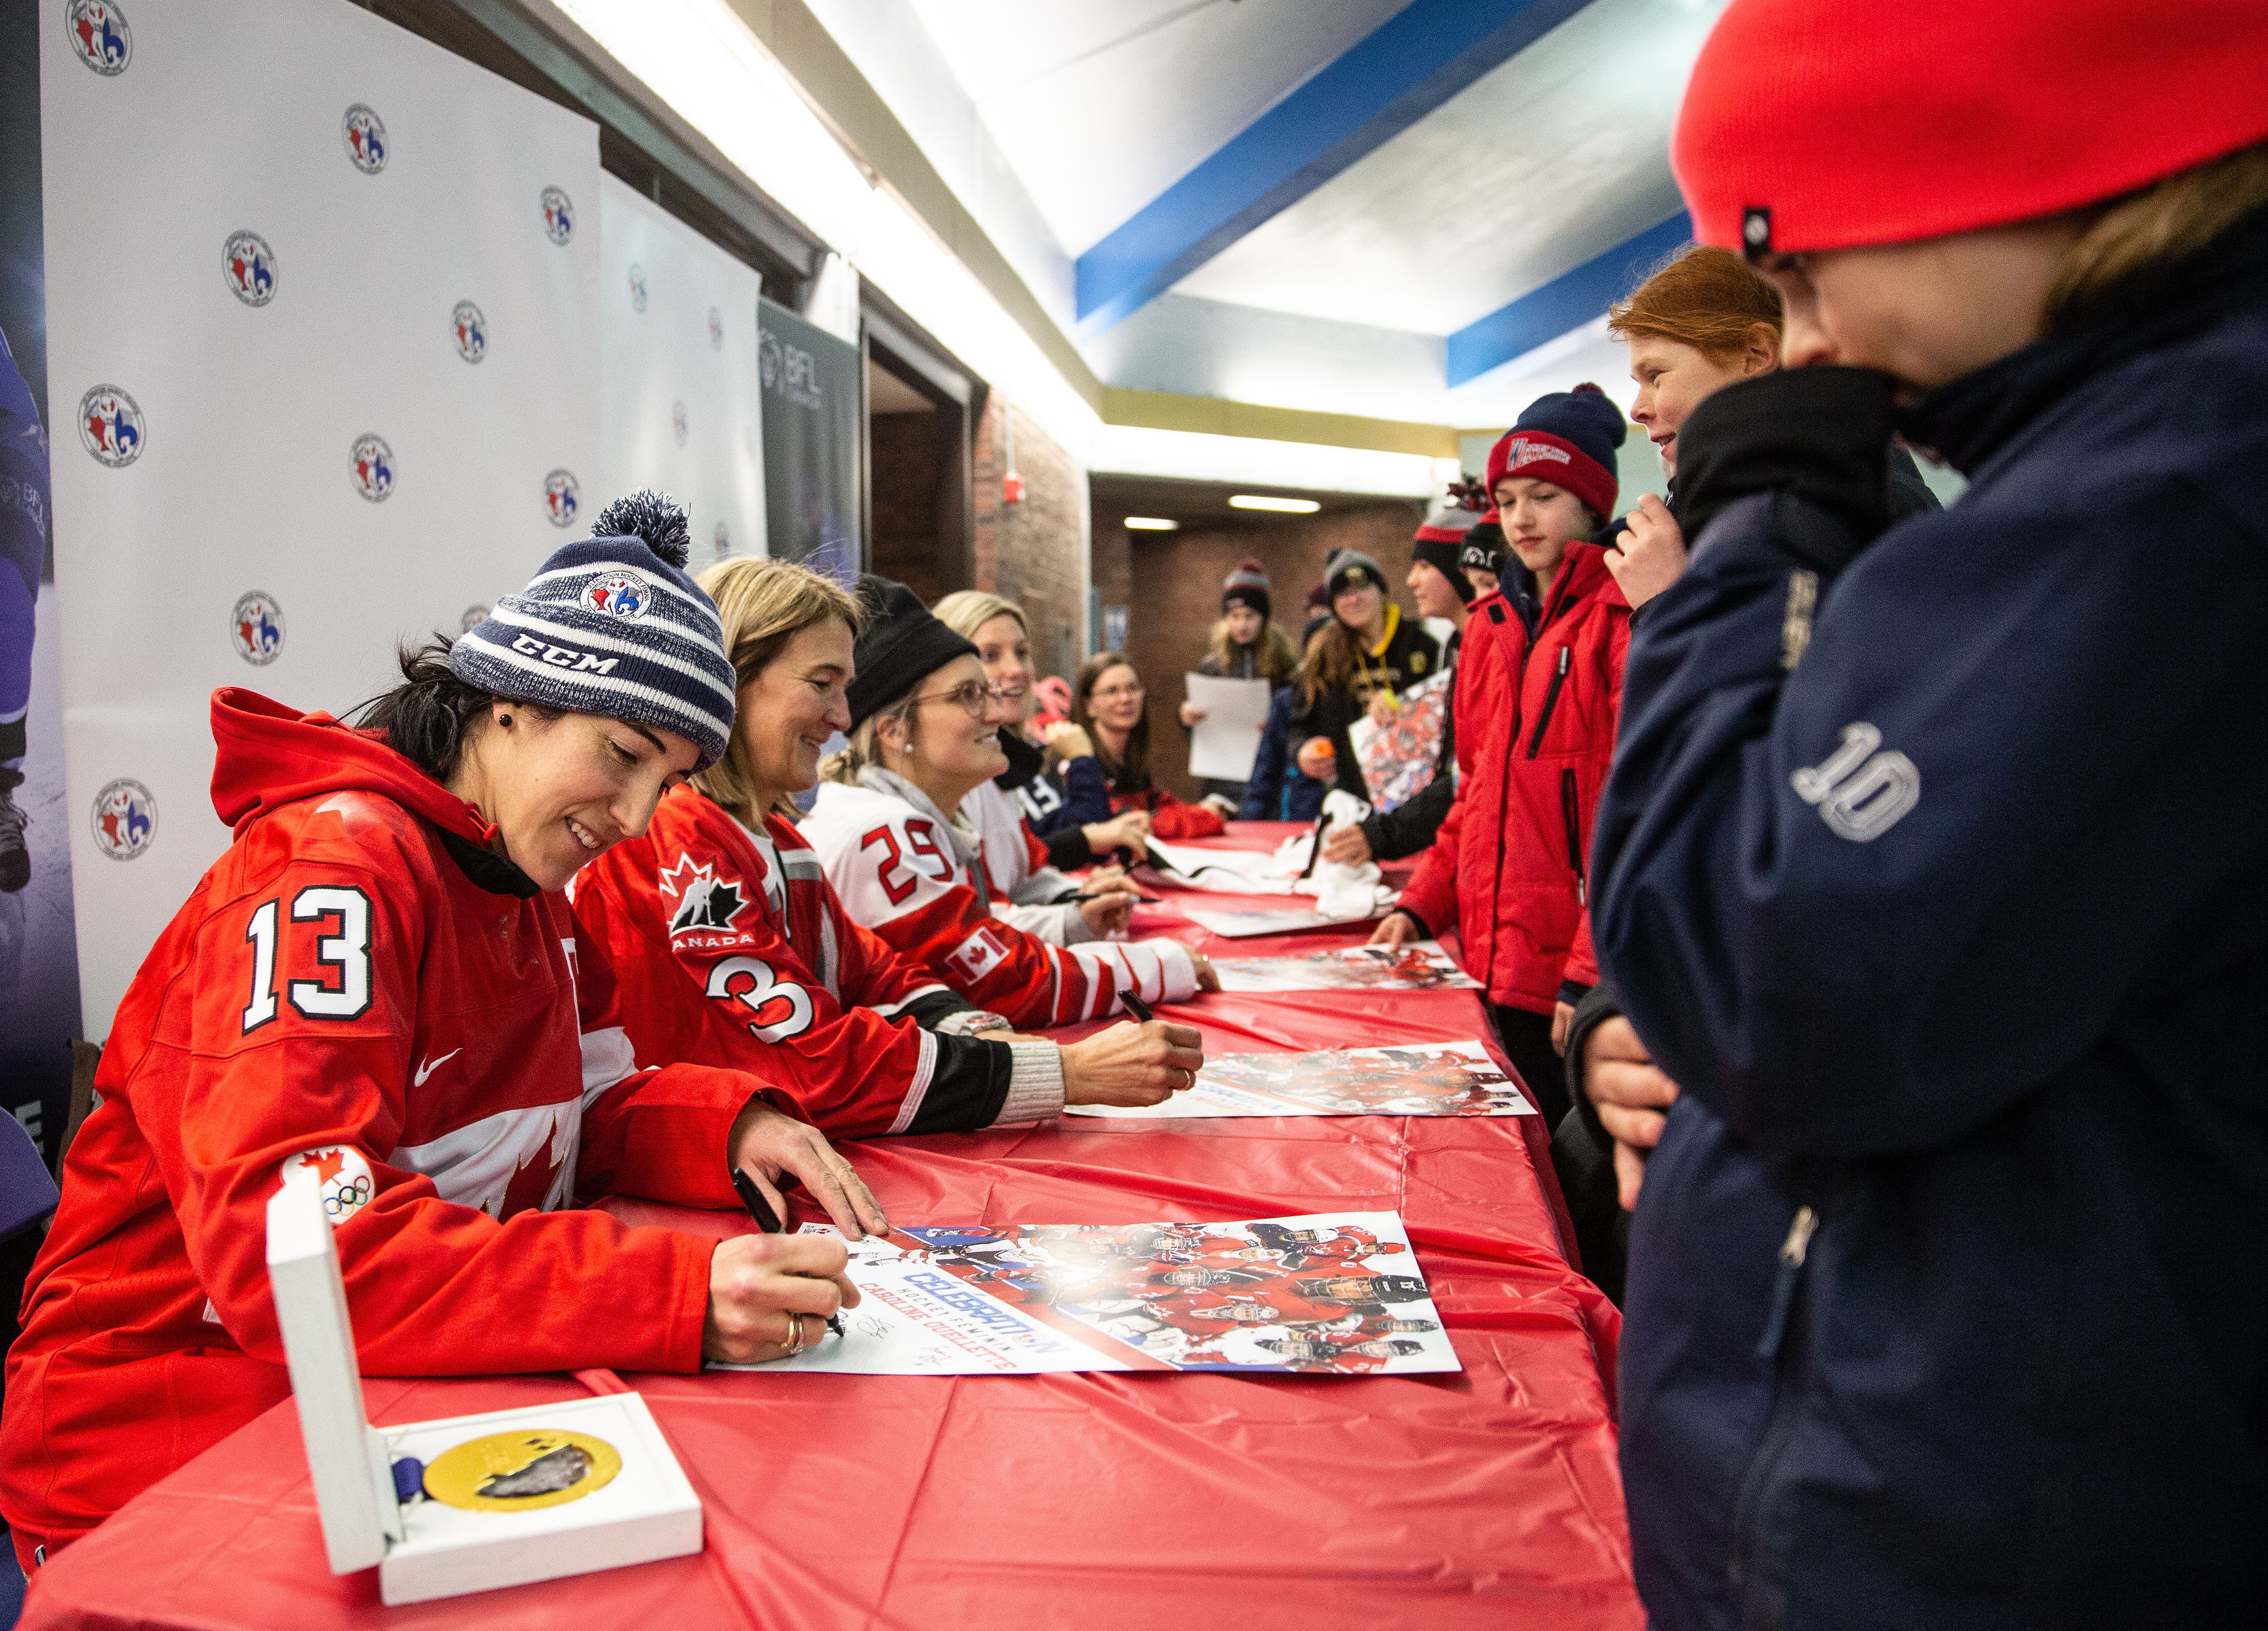 Players signing autographs